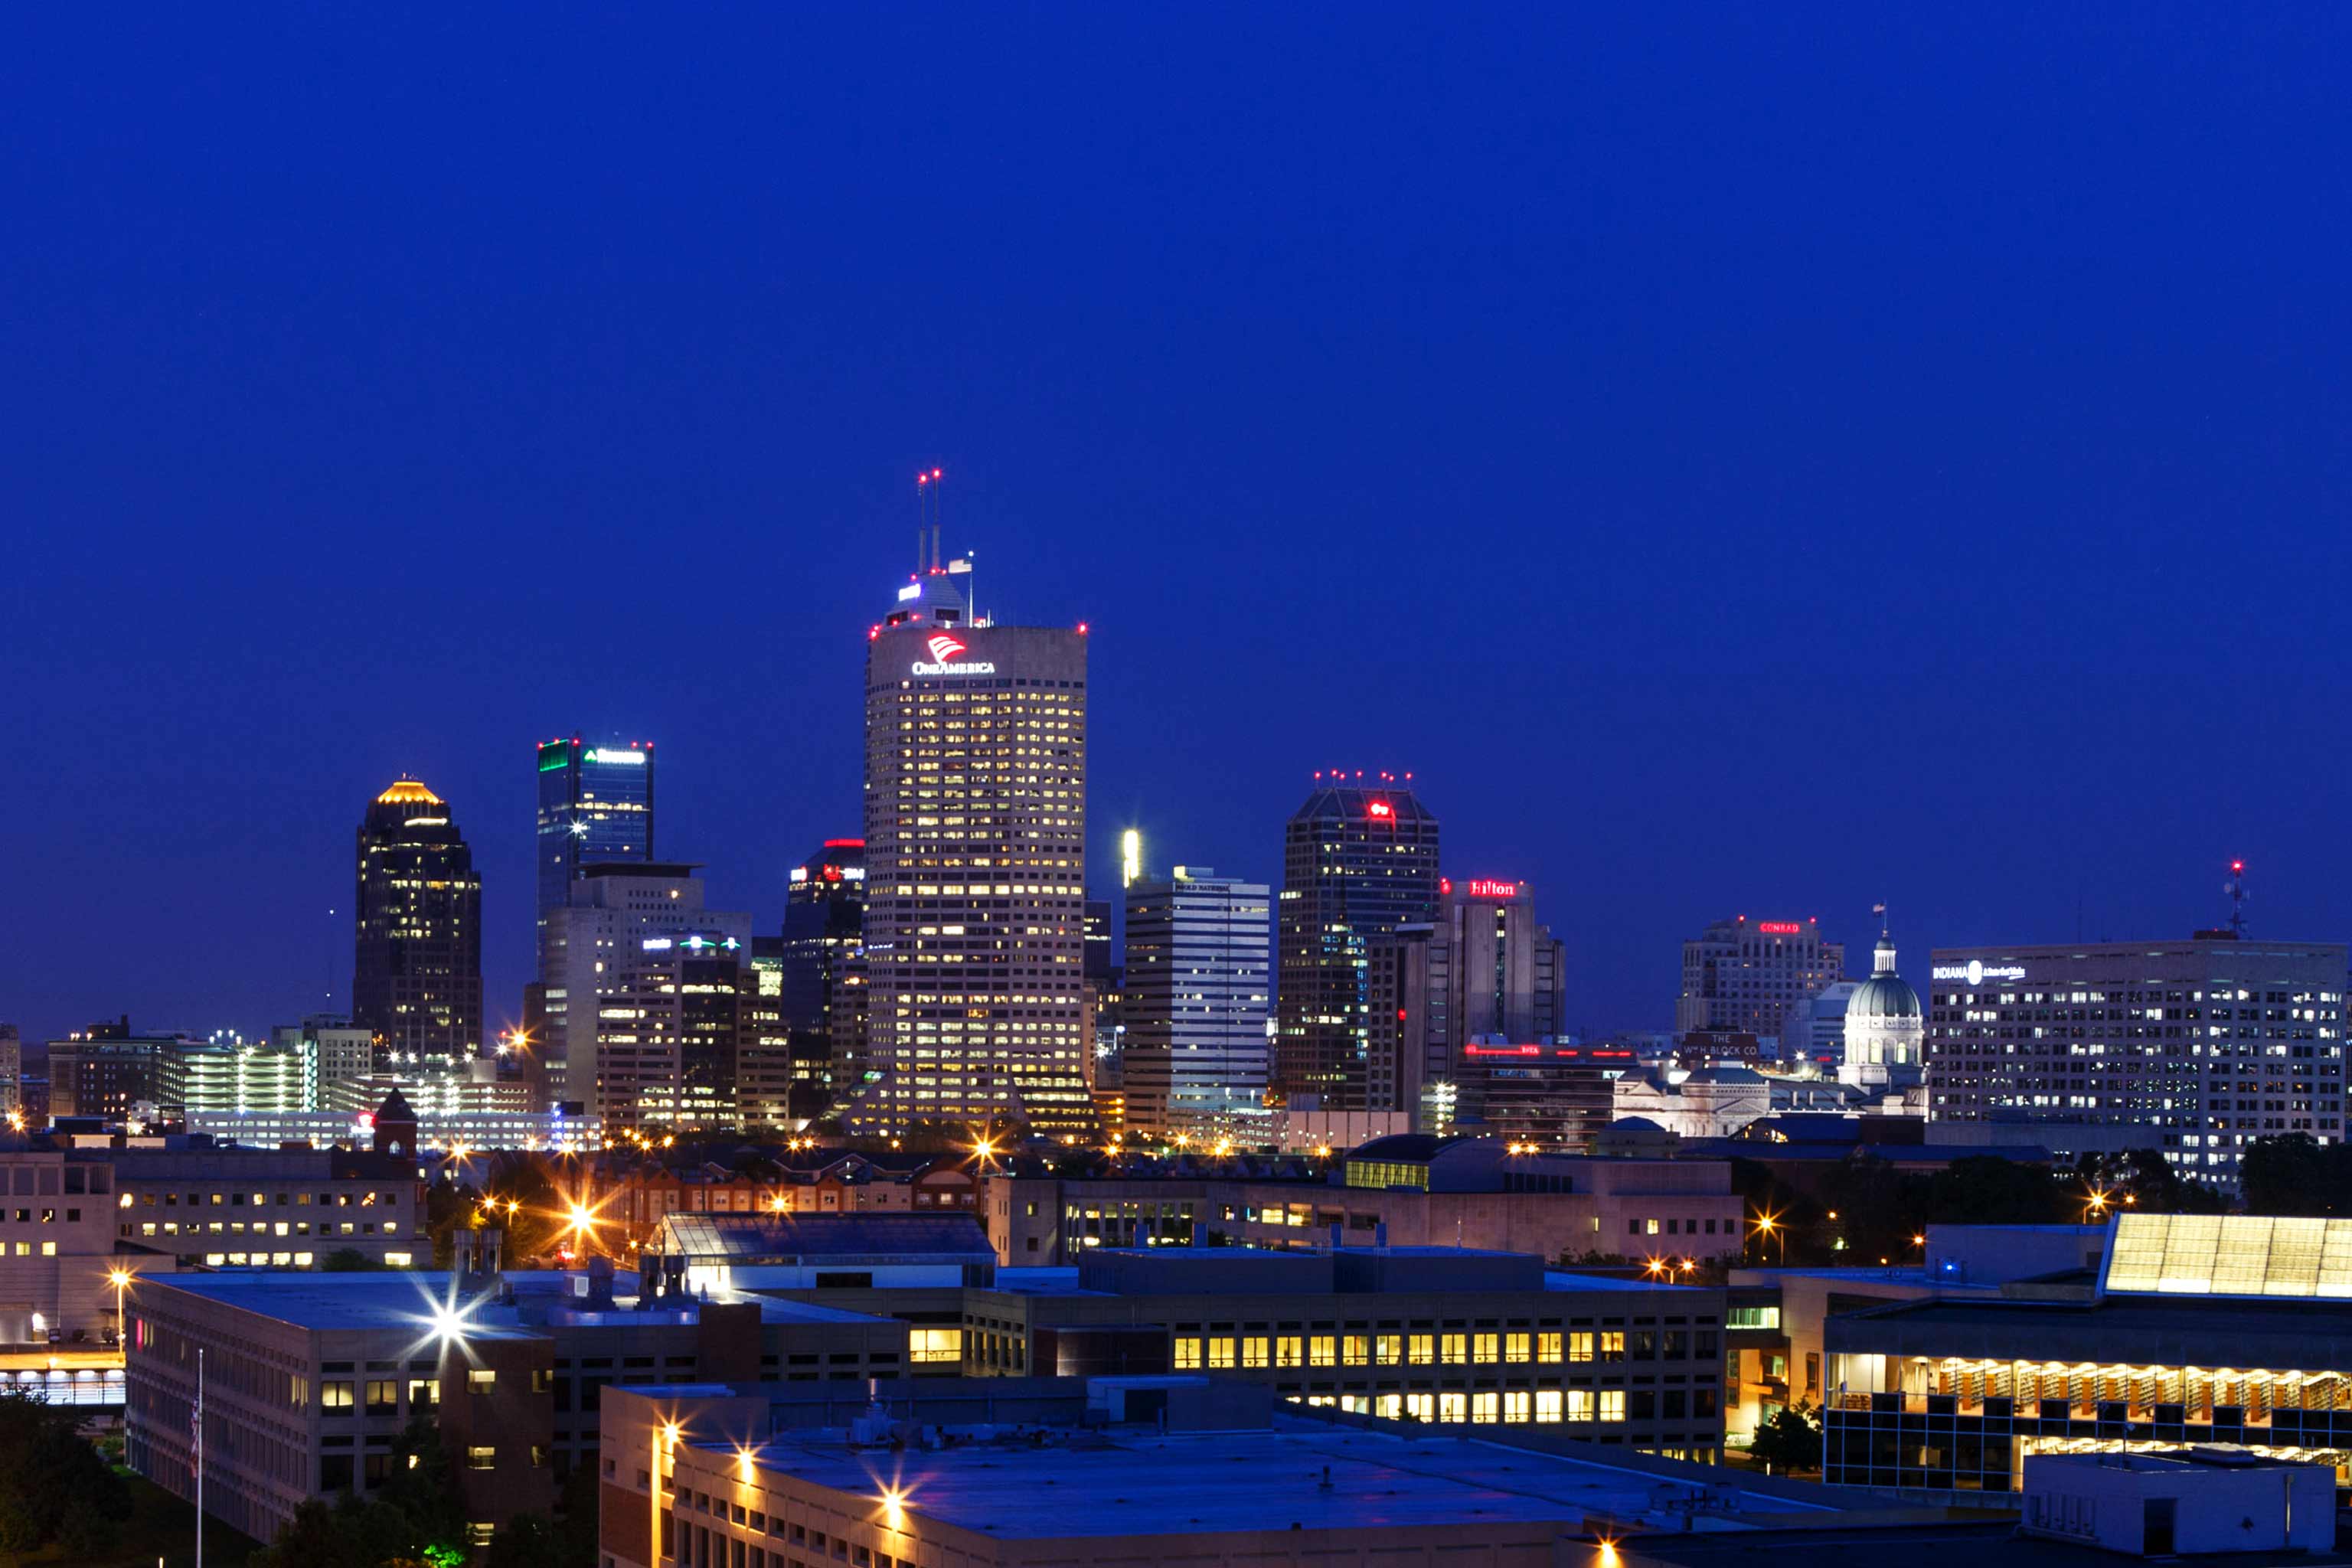 The Indianapolis skyline in the evening